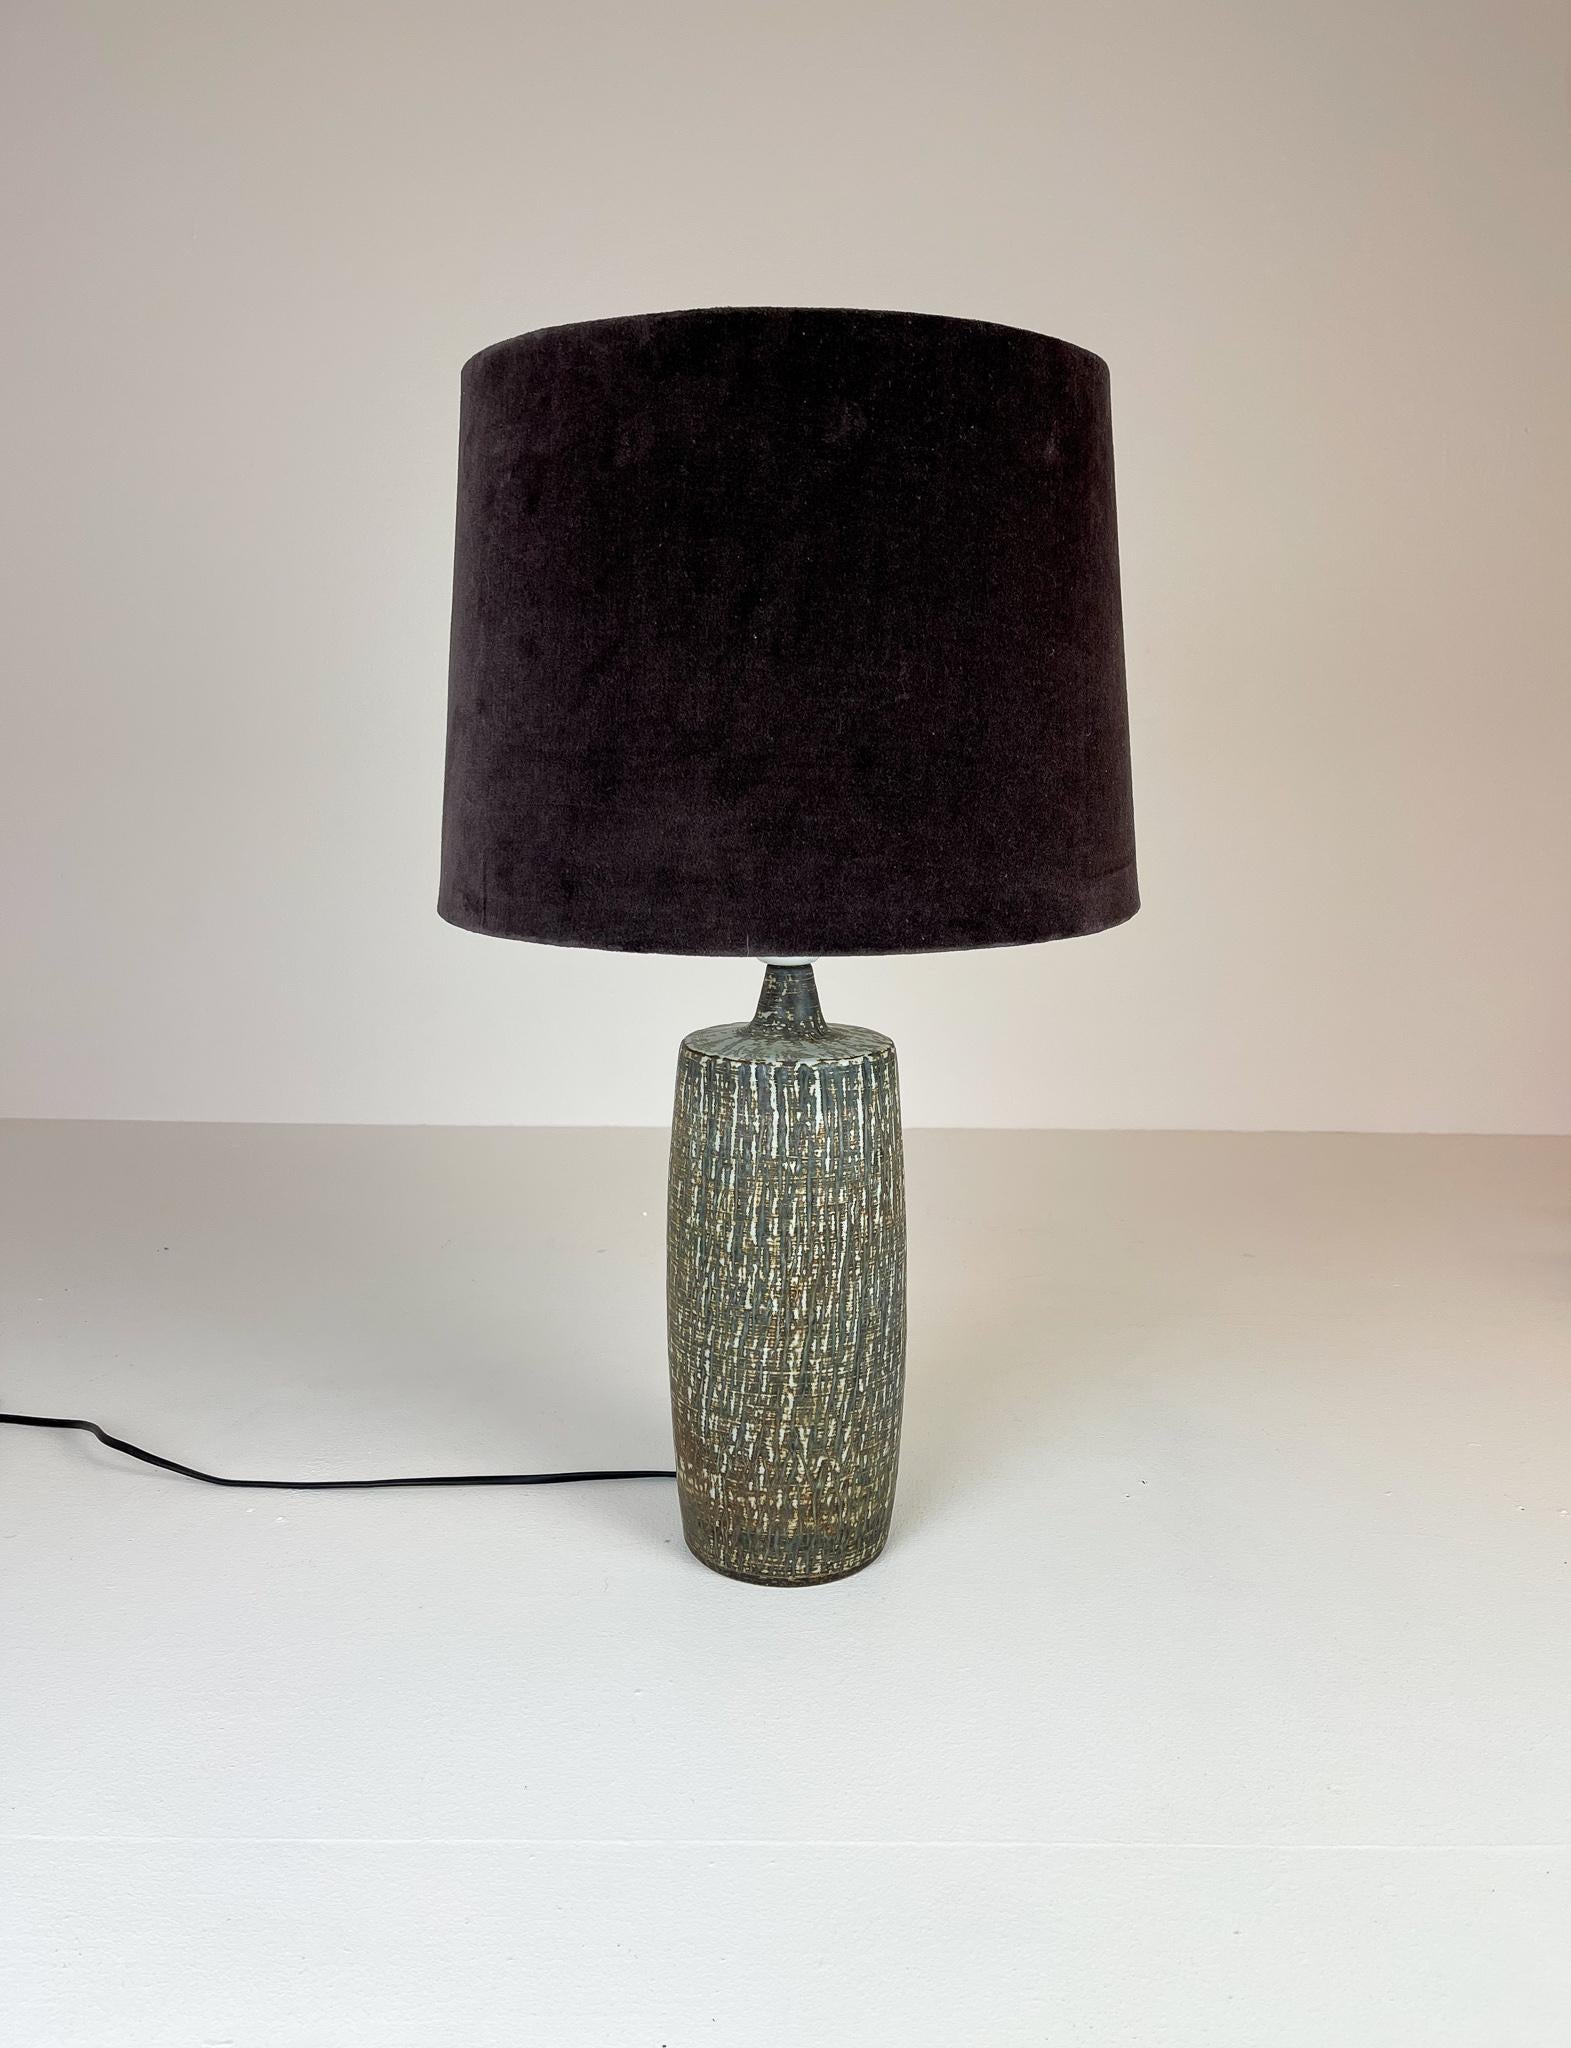 Large size table lamp was named Rubus and designed by one of the ceramic designer icons of Sweden Gunnar Nylund. 

Good vintage condition, new shade. 

Measures: Ceramics H 44, D 18 cm with shade H 61 cm, D 40.
 

